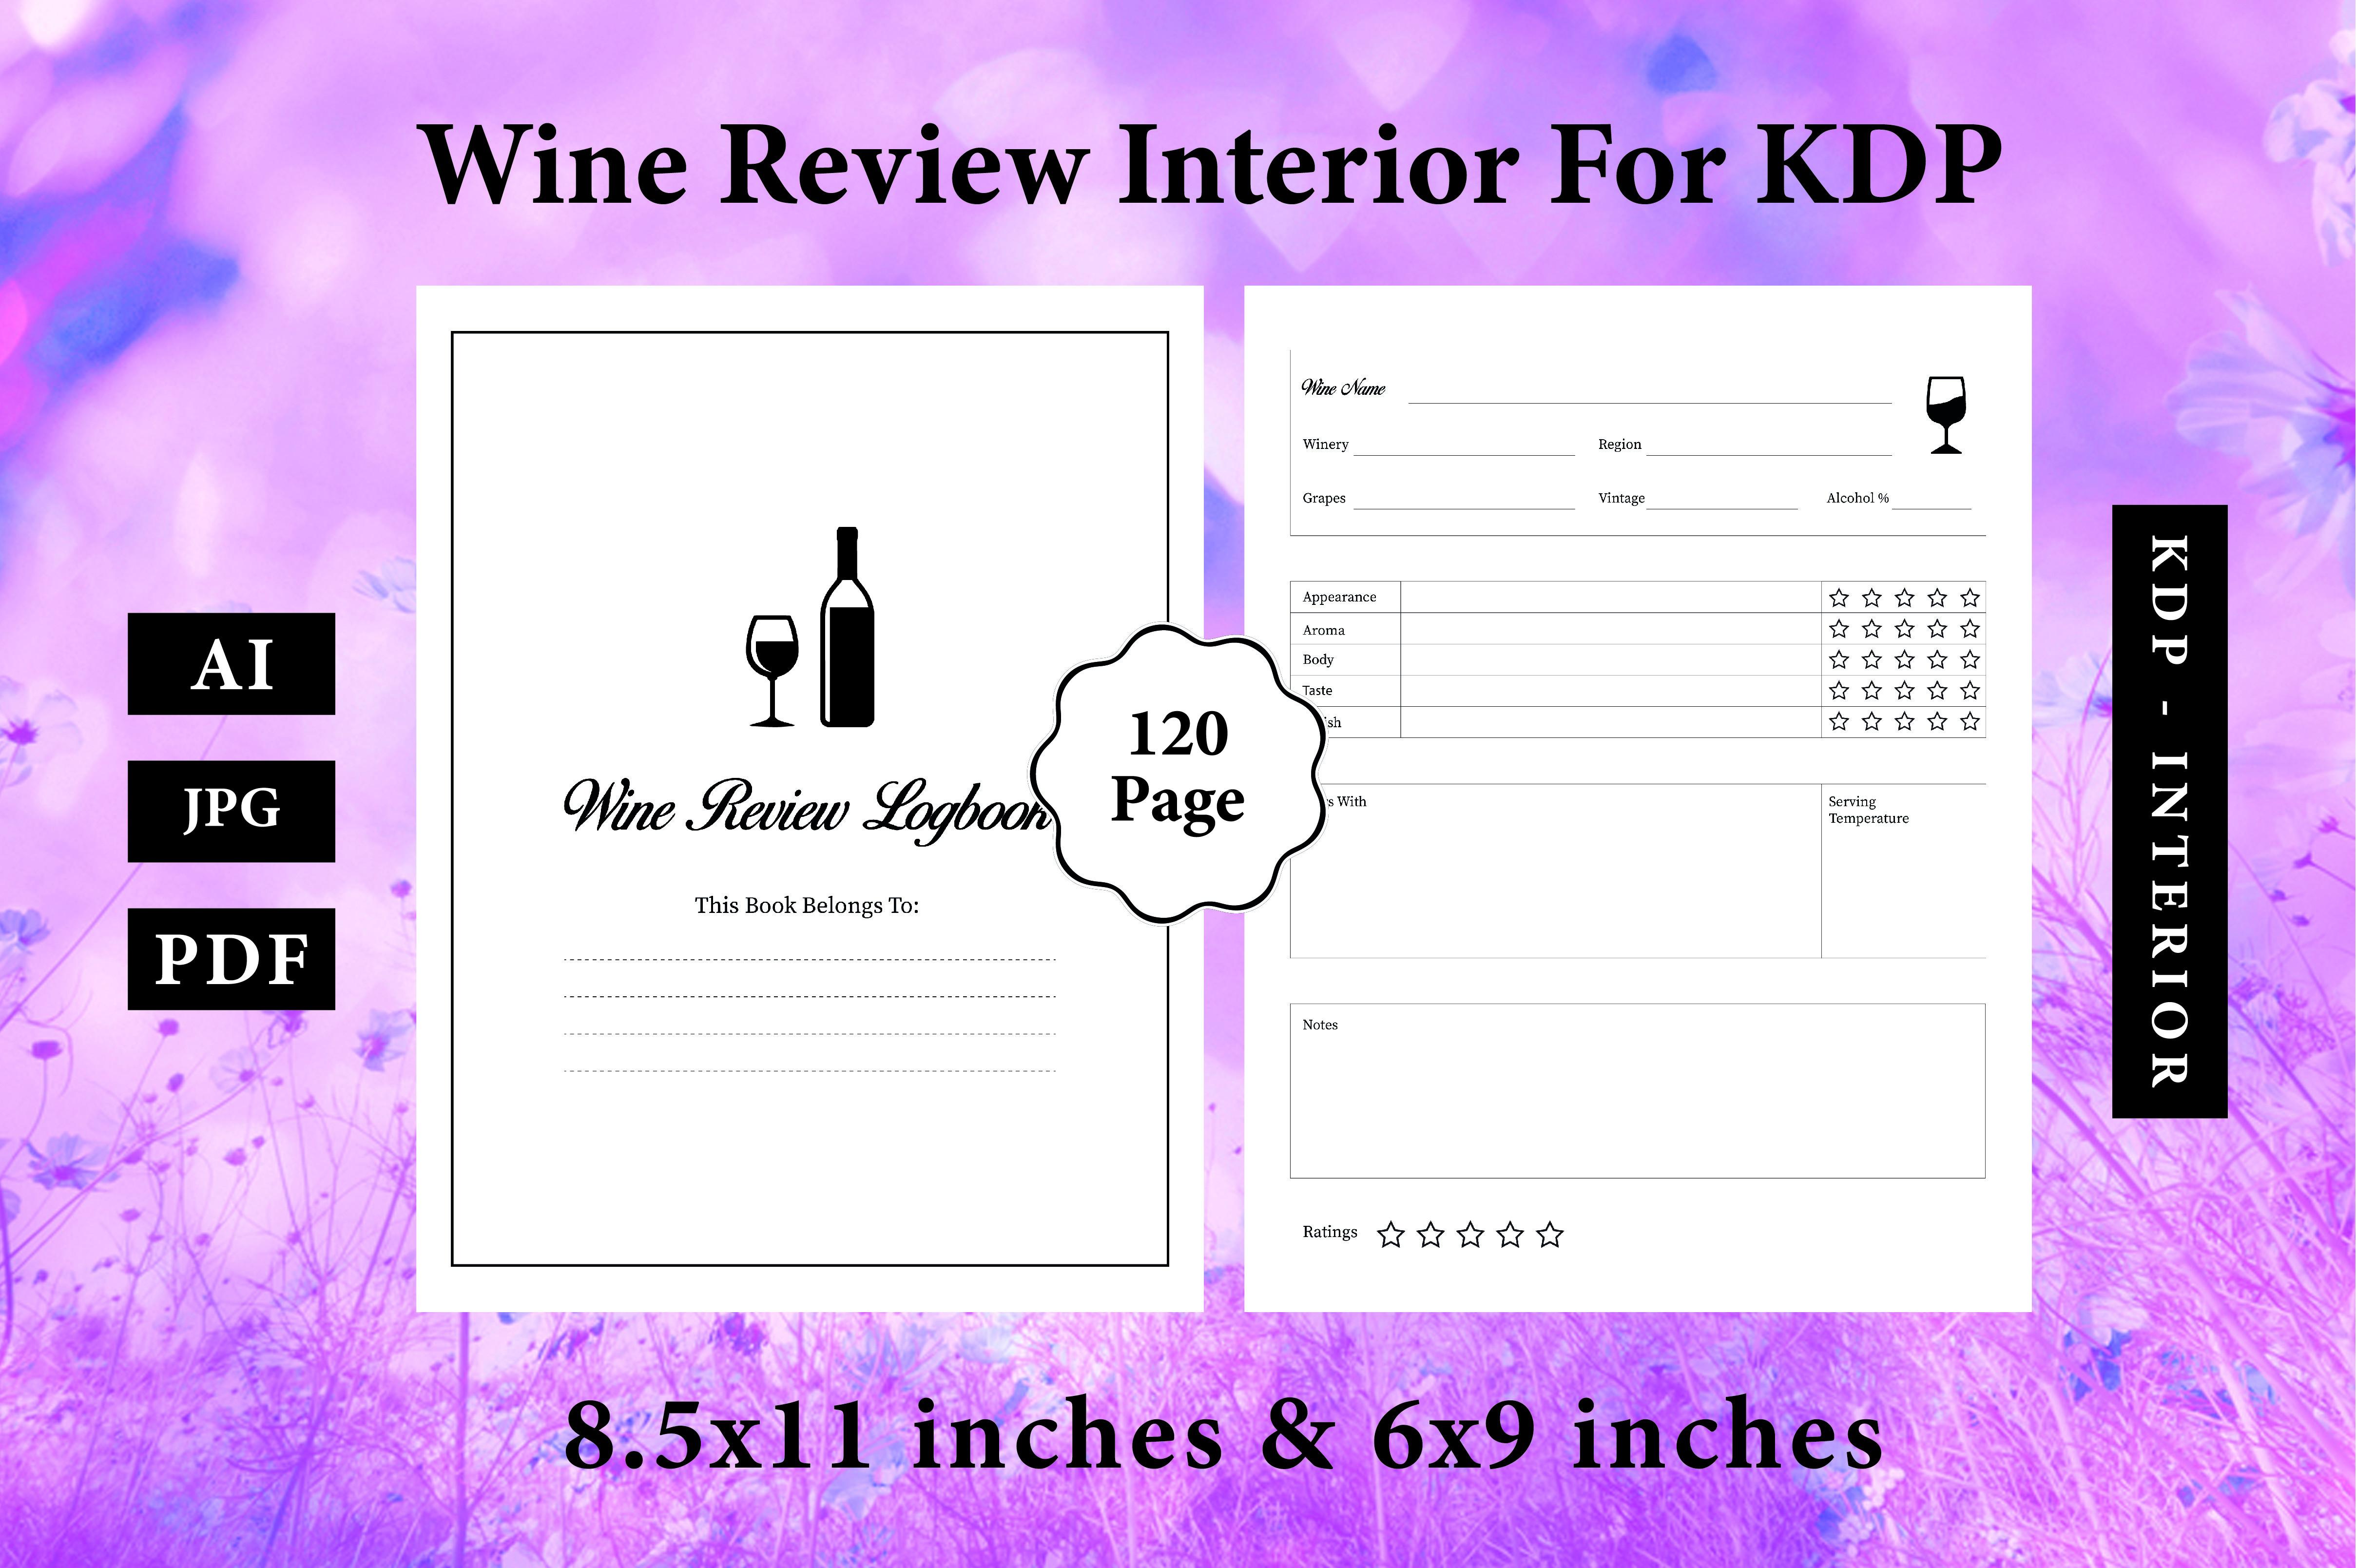 Wine Review Interior for KDP